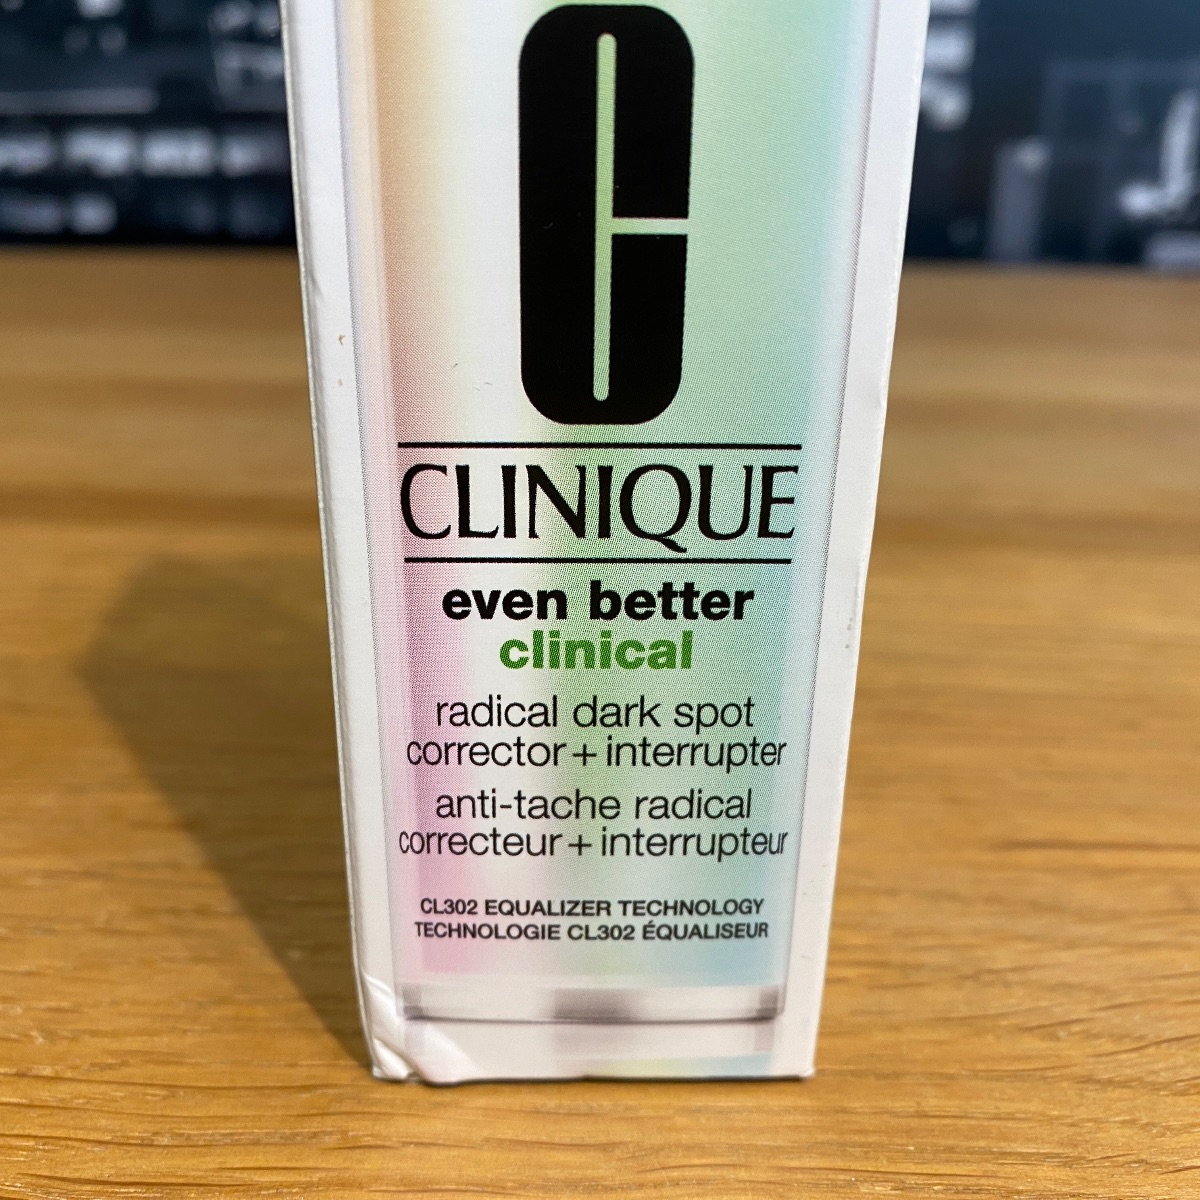 Clinique Even Better Clinical Radical Dark Spot Corrector And Interrupter 50ml BALMS AND TREATMENTS 192333027226 (Brand New)